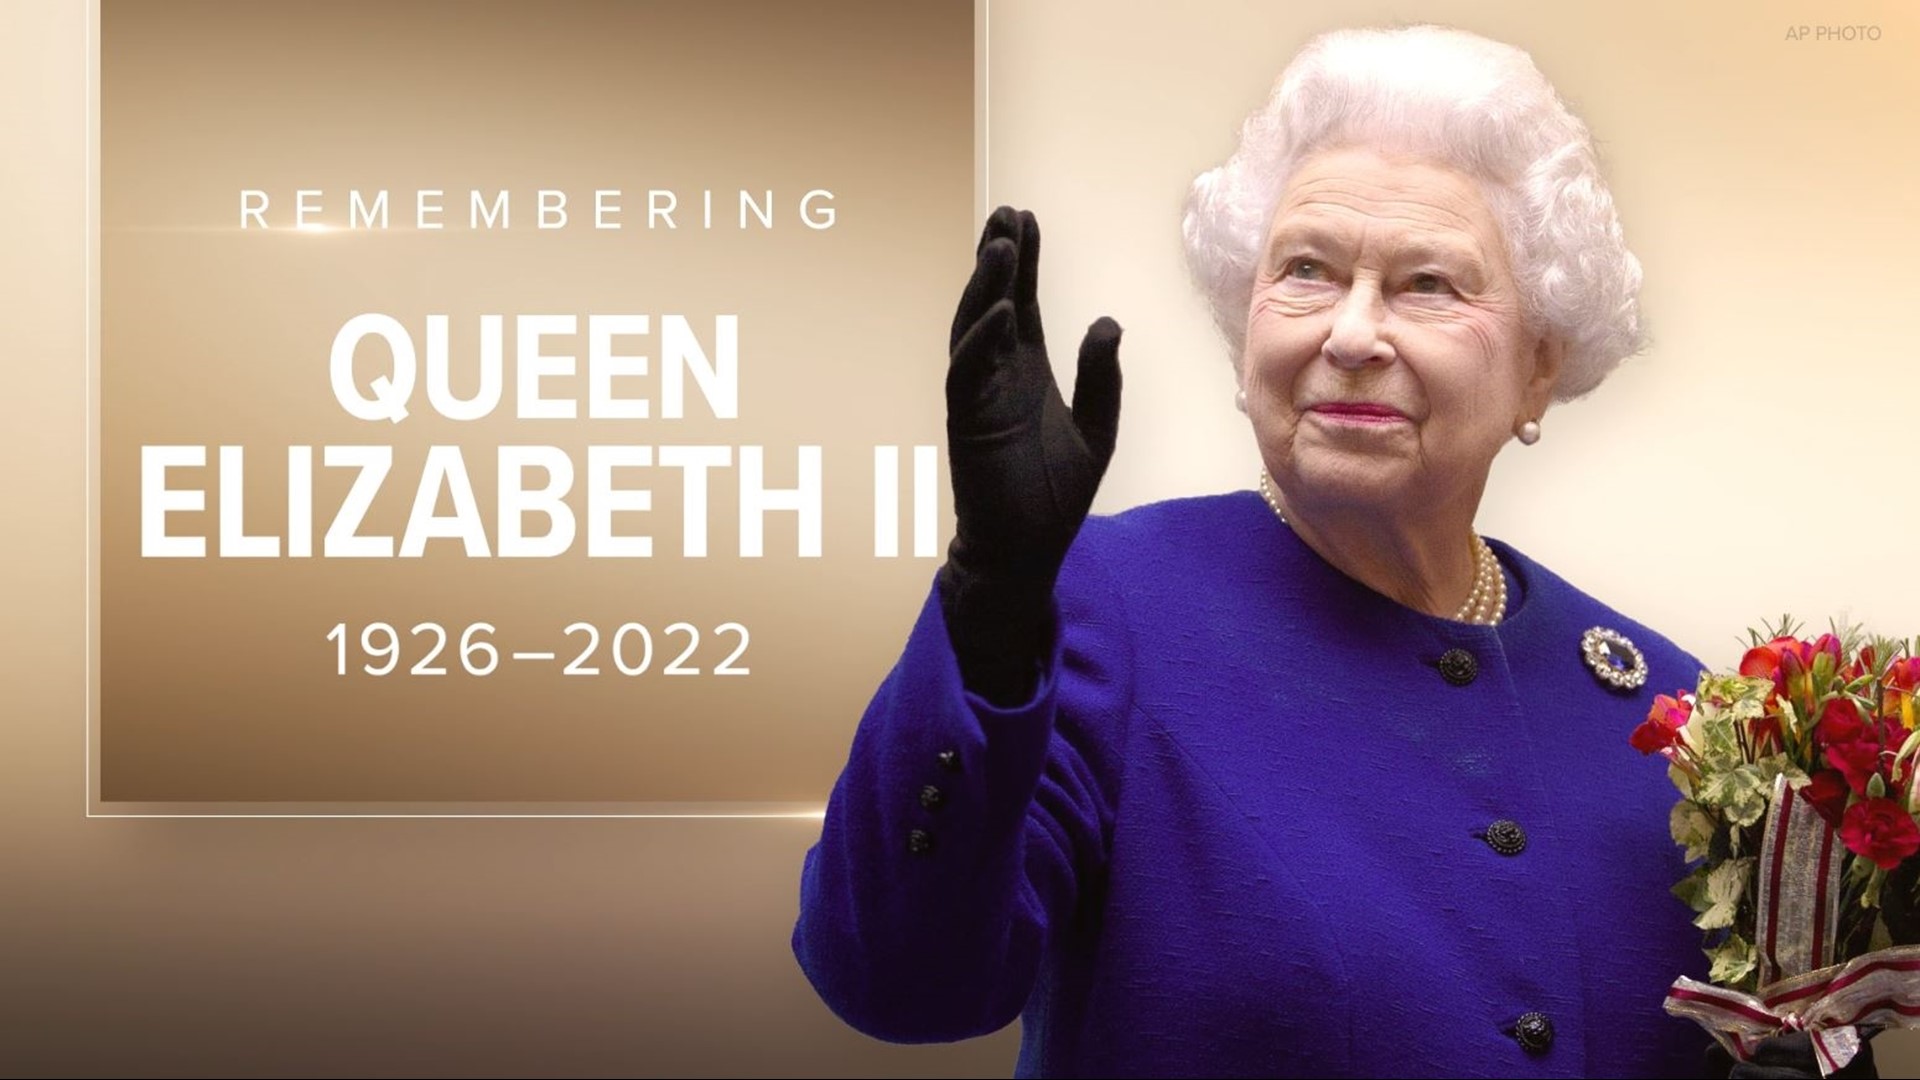 An obituary piece looking back the life and reign of Queen Elizabeth II, Britain’s longest-reigning monarch. She died on September 8, 2022 at the age of 96.